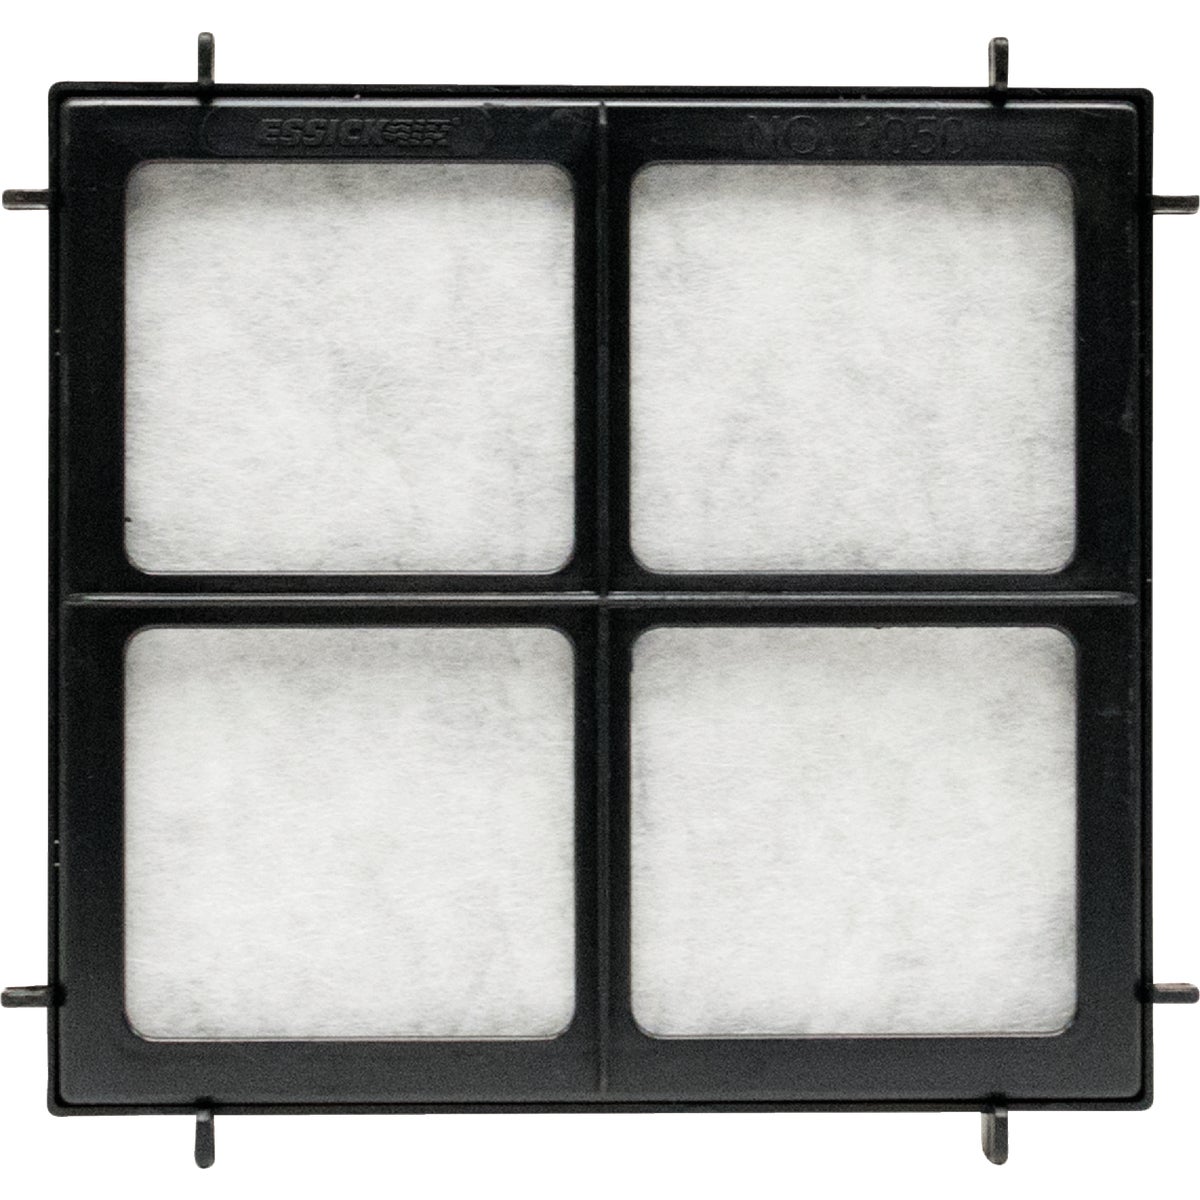 Essick Air AIRCARE 1050 Humidifier Filter with Air Filter